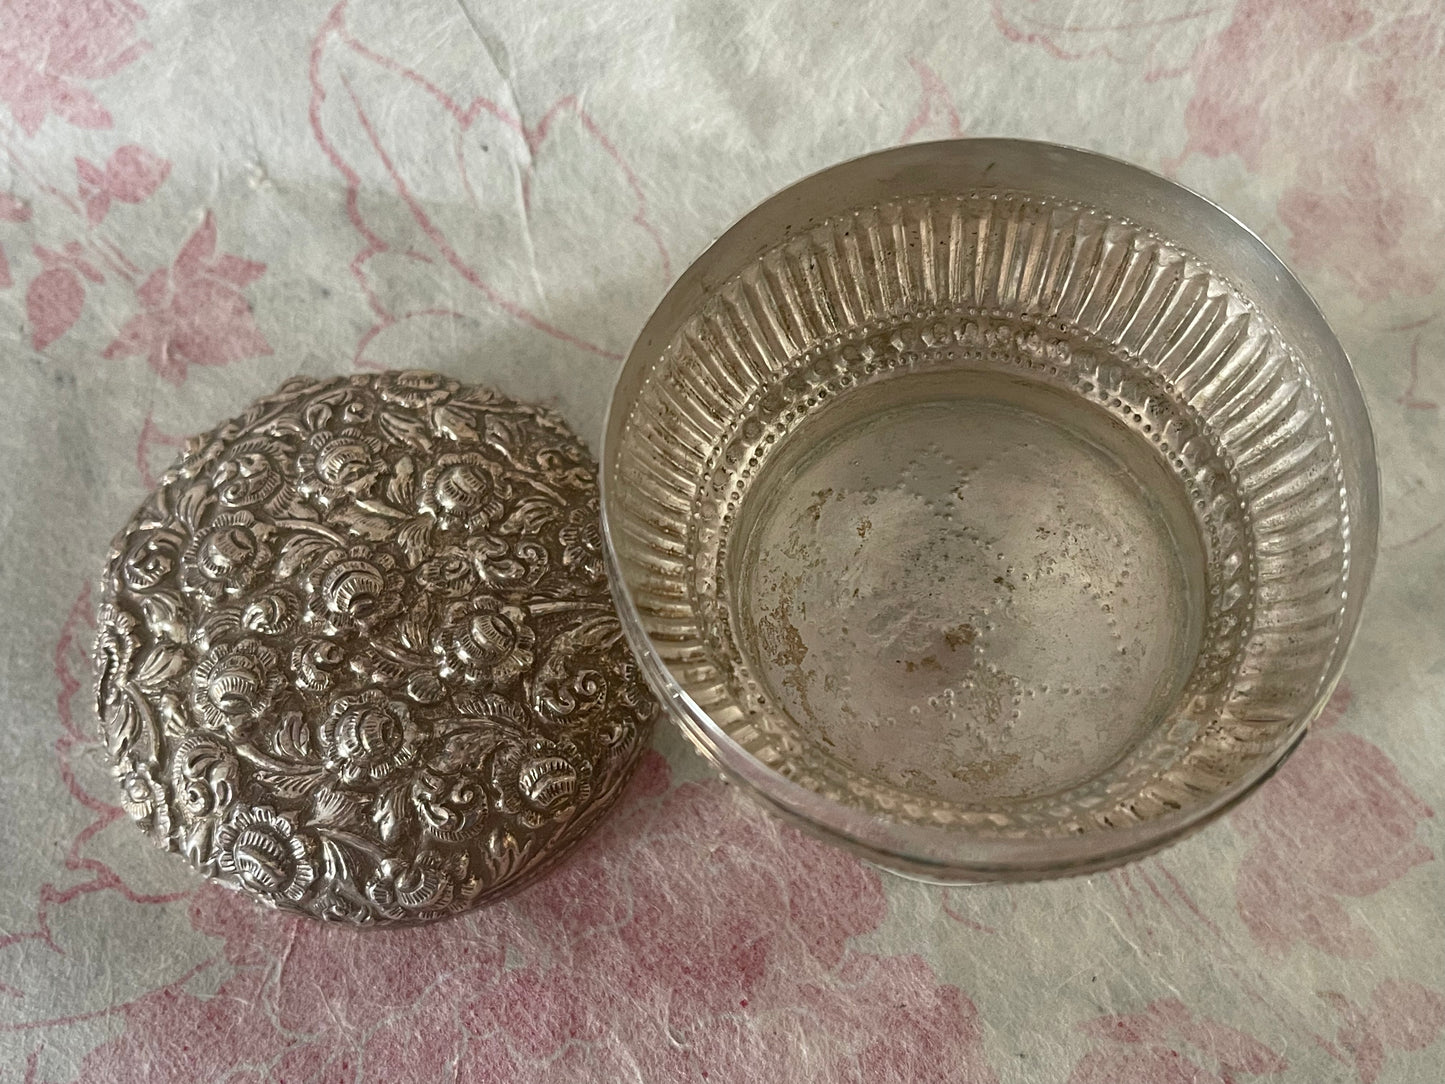 An antique silver south East Asian round box with lid